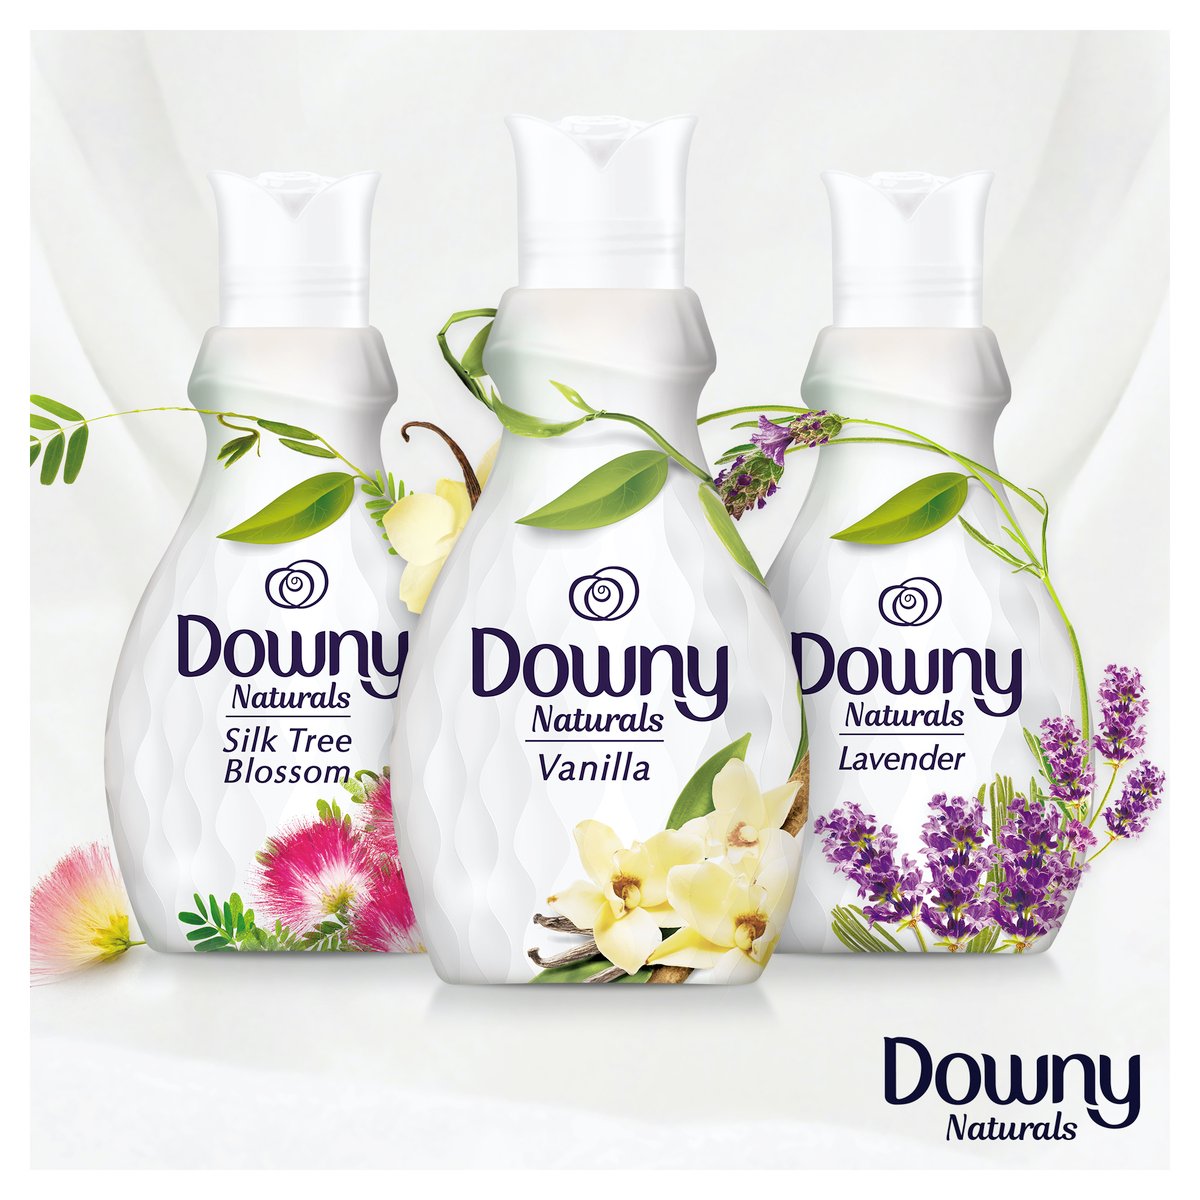 Downy Naturals Concentrate Fabric Softener Lavender Scent 2 x 880ml